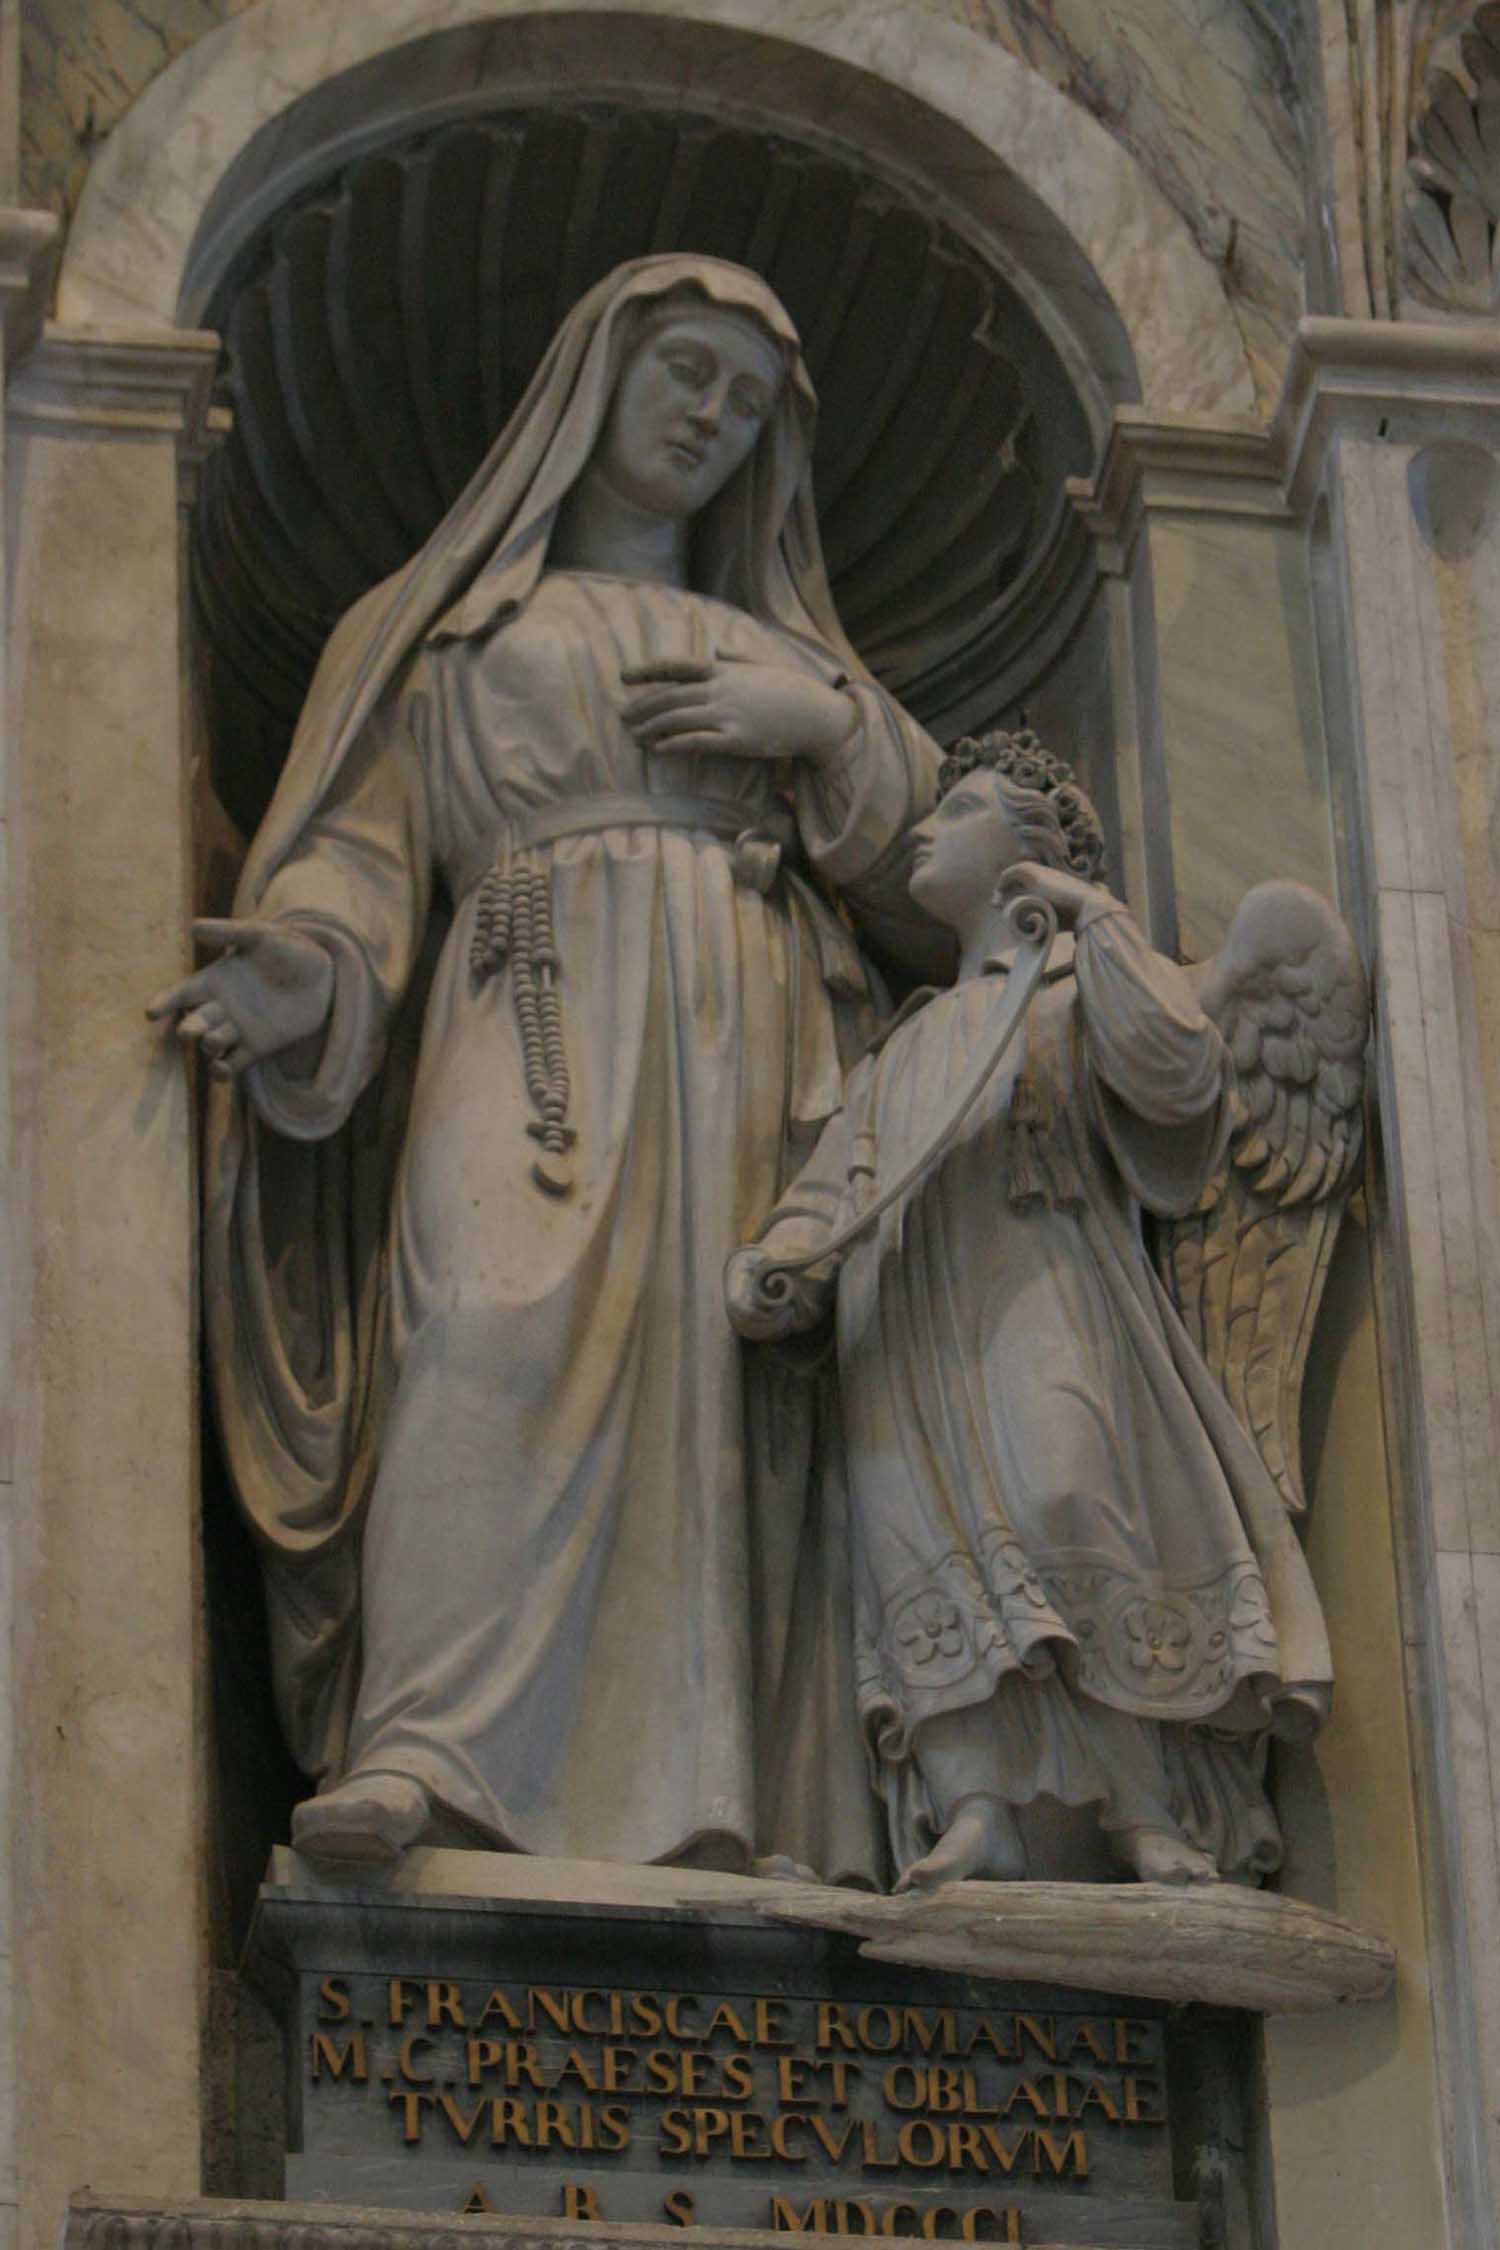 St. Frances of Rome - Founder Statue